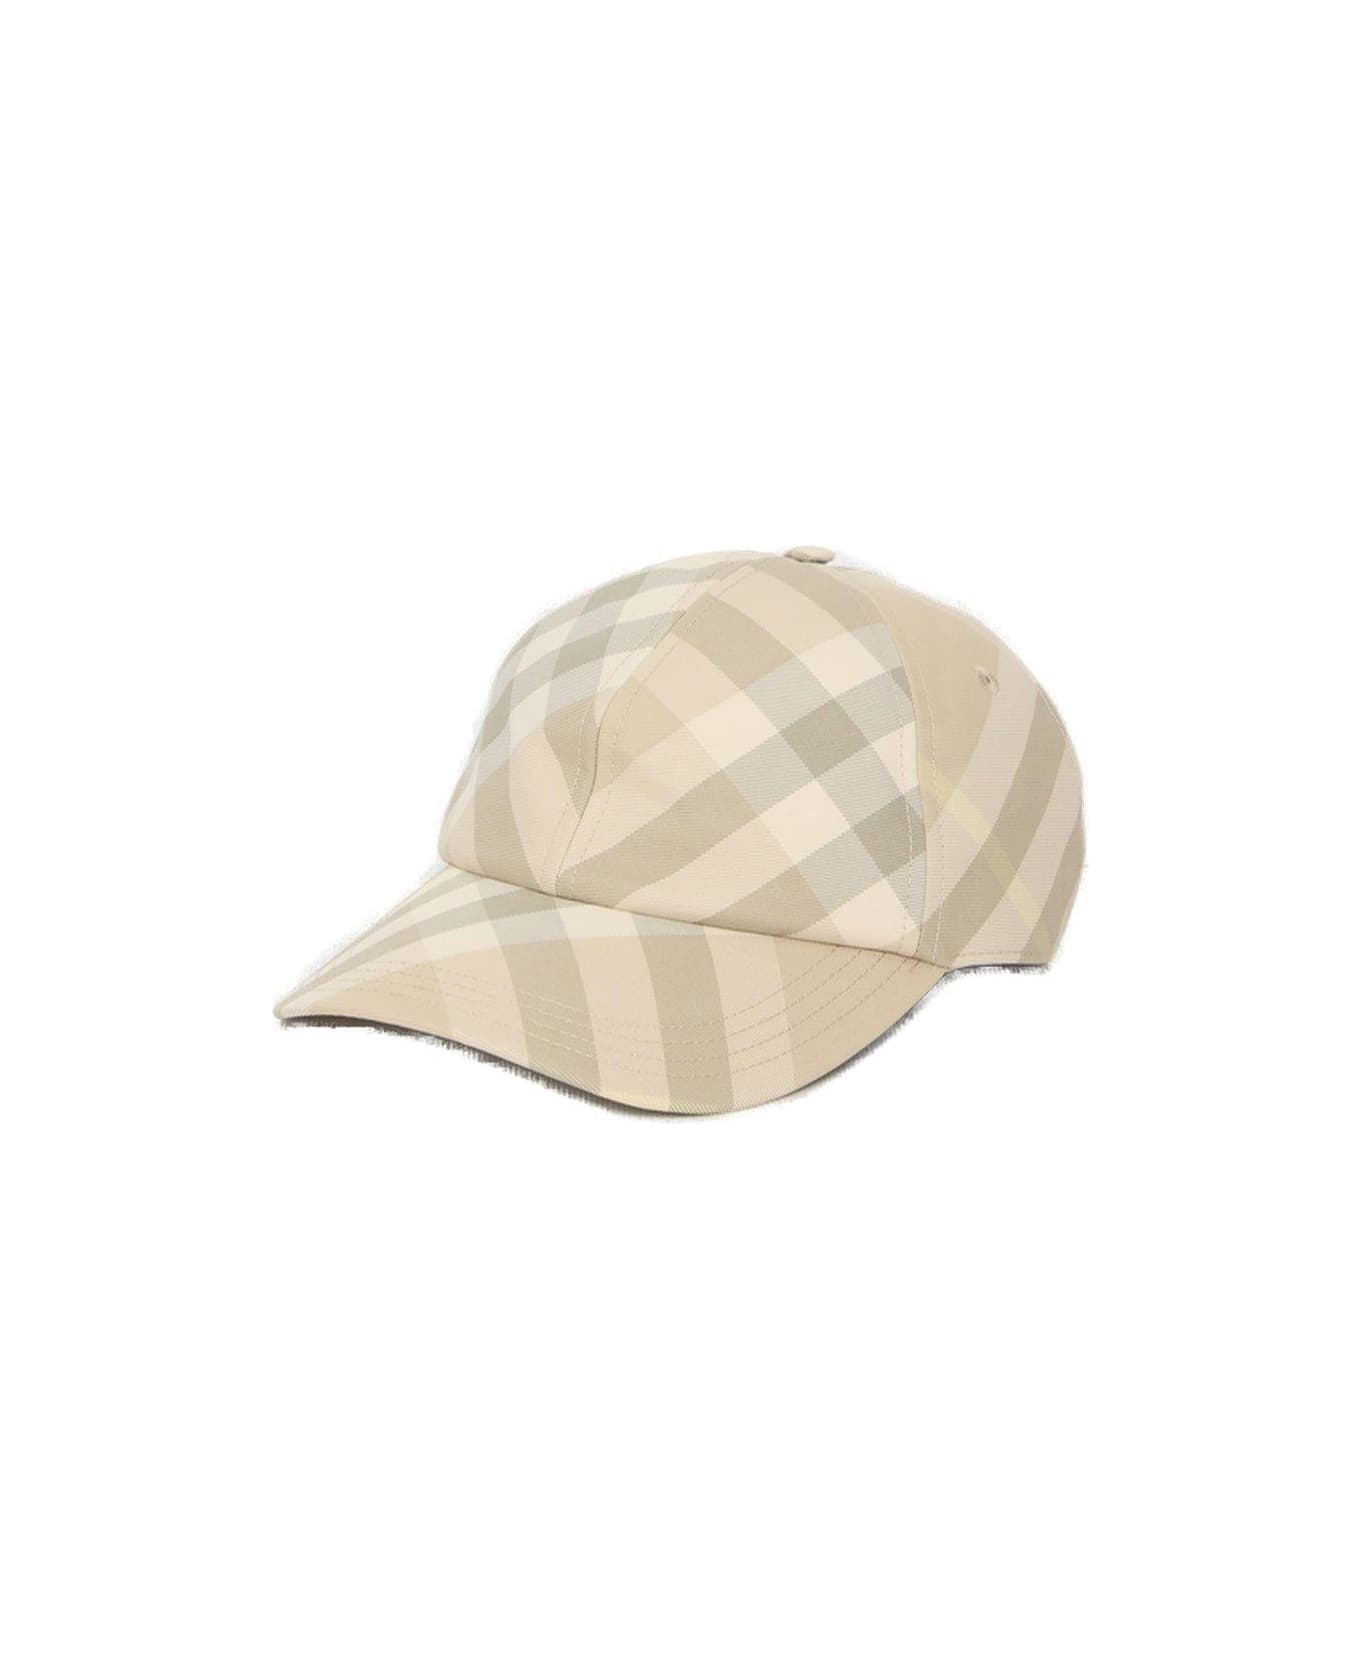 Burberry Checked Baseball Hat - Flax